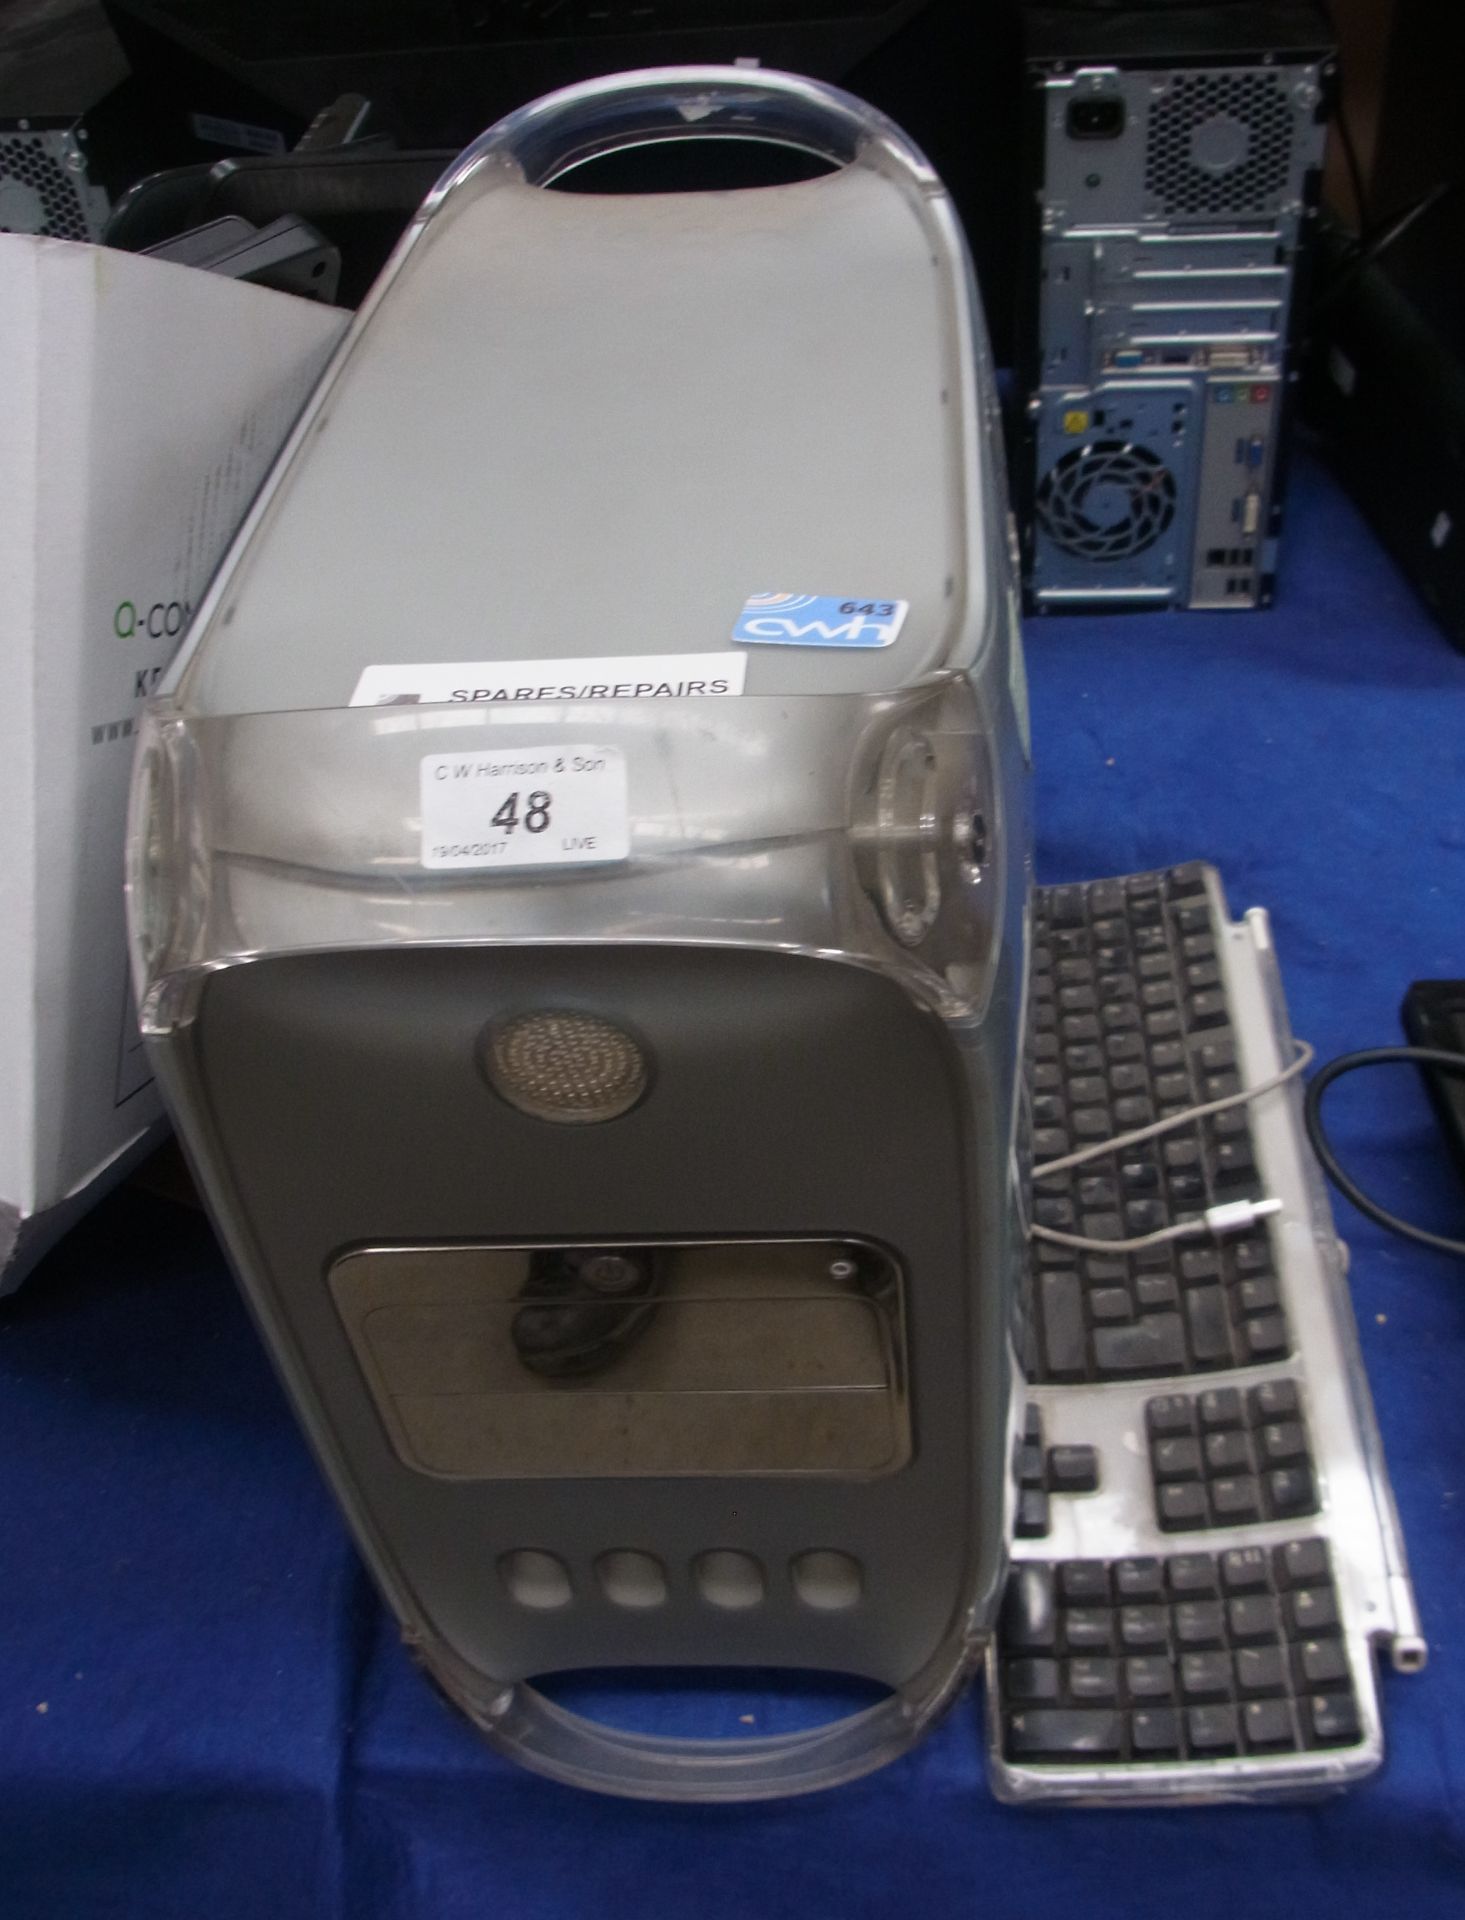 An Apple Mac G4 tower computer - power lead and keyboard (please note spares and repairs only)